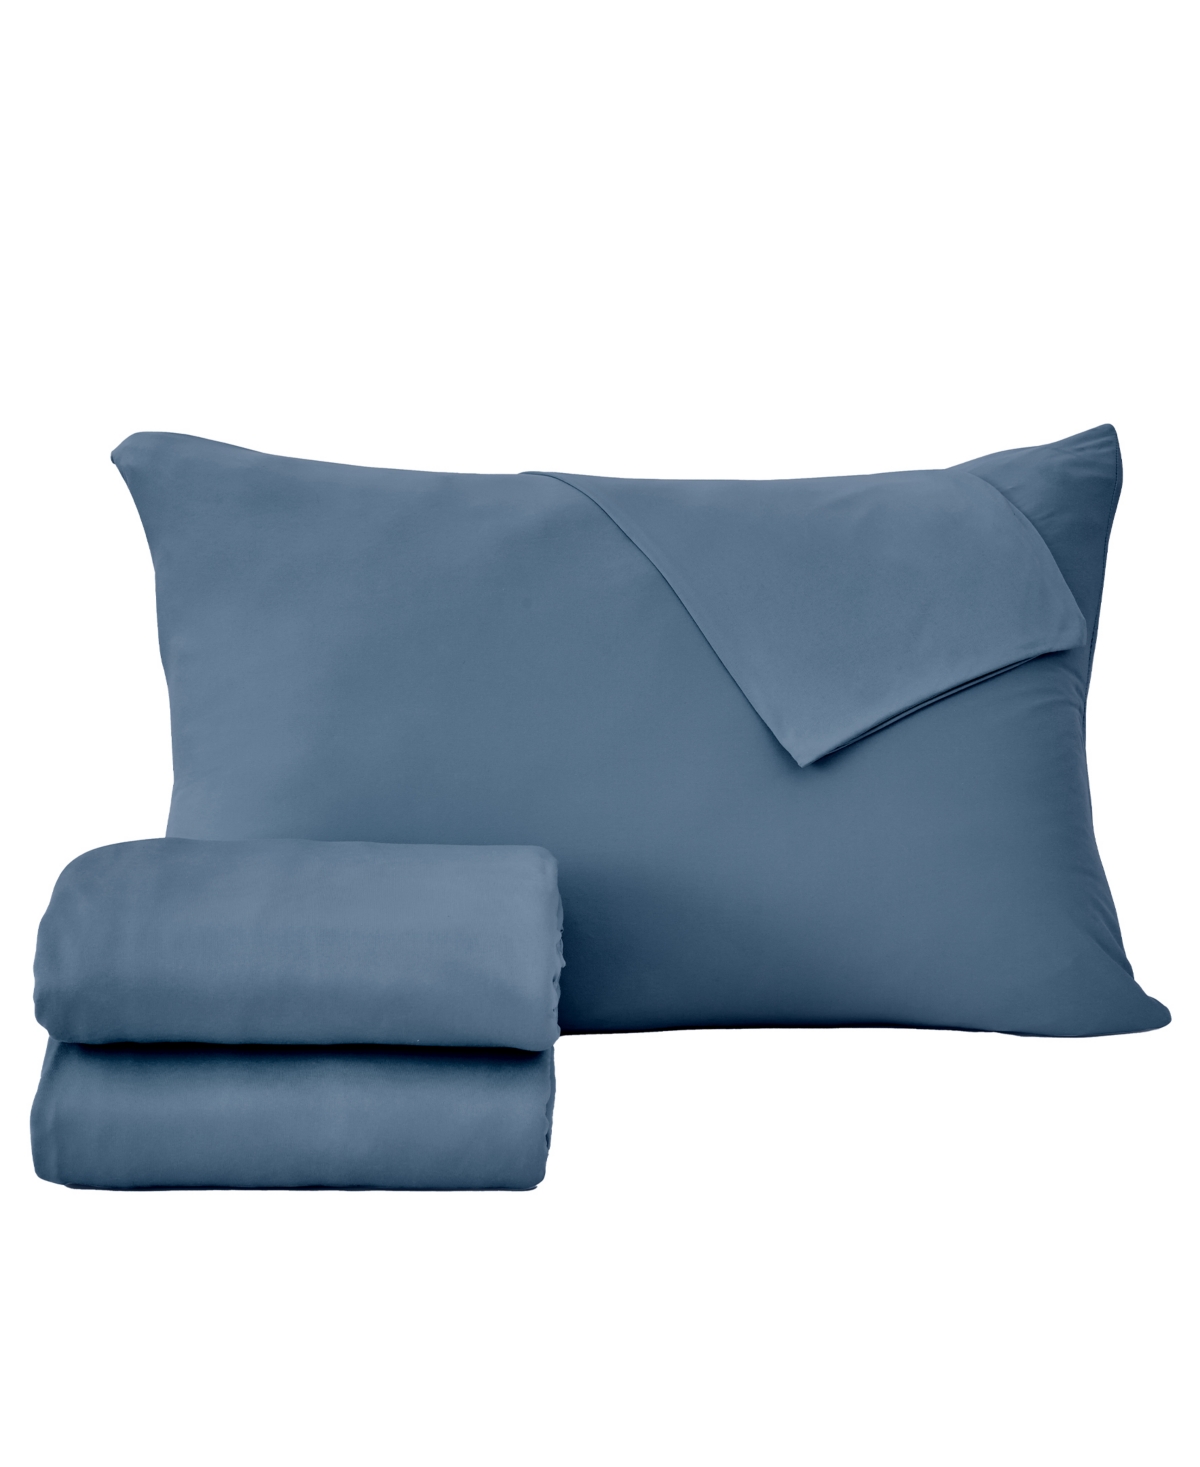 Shop Premium Comforts Performance Cooling Super Soft Polyester 3 Piece Sheet Set, Twin In Oceana